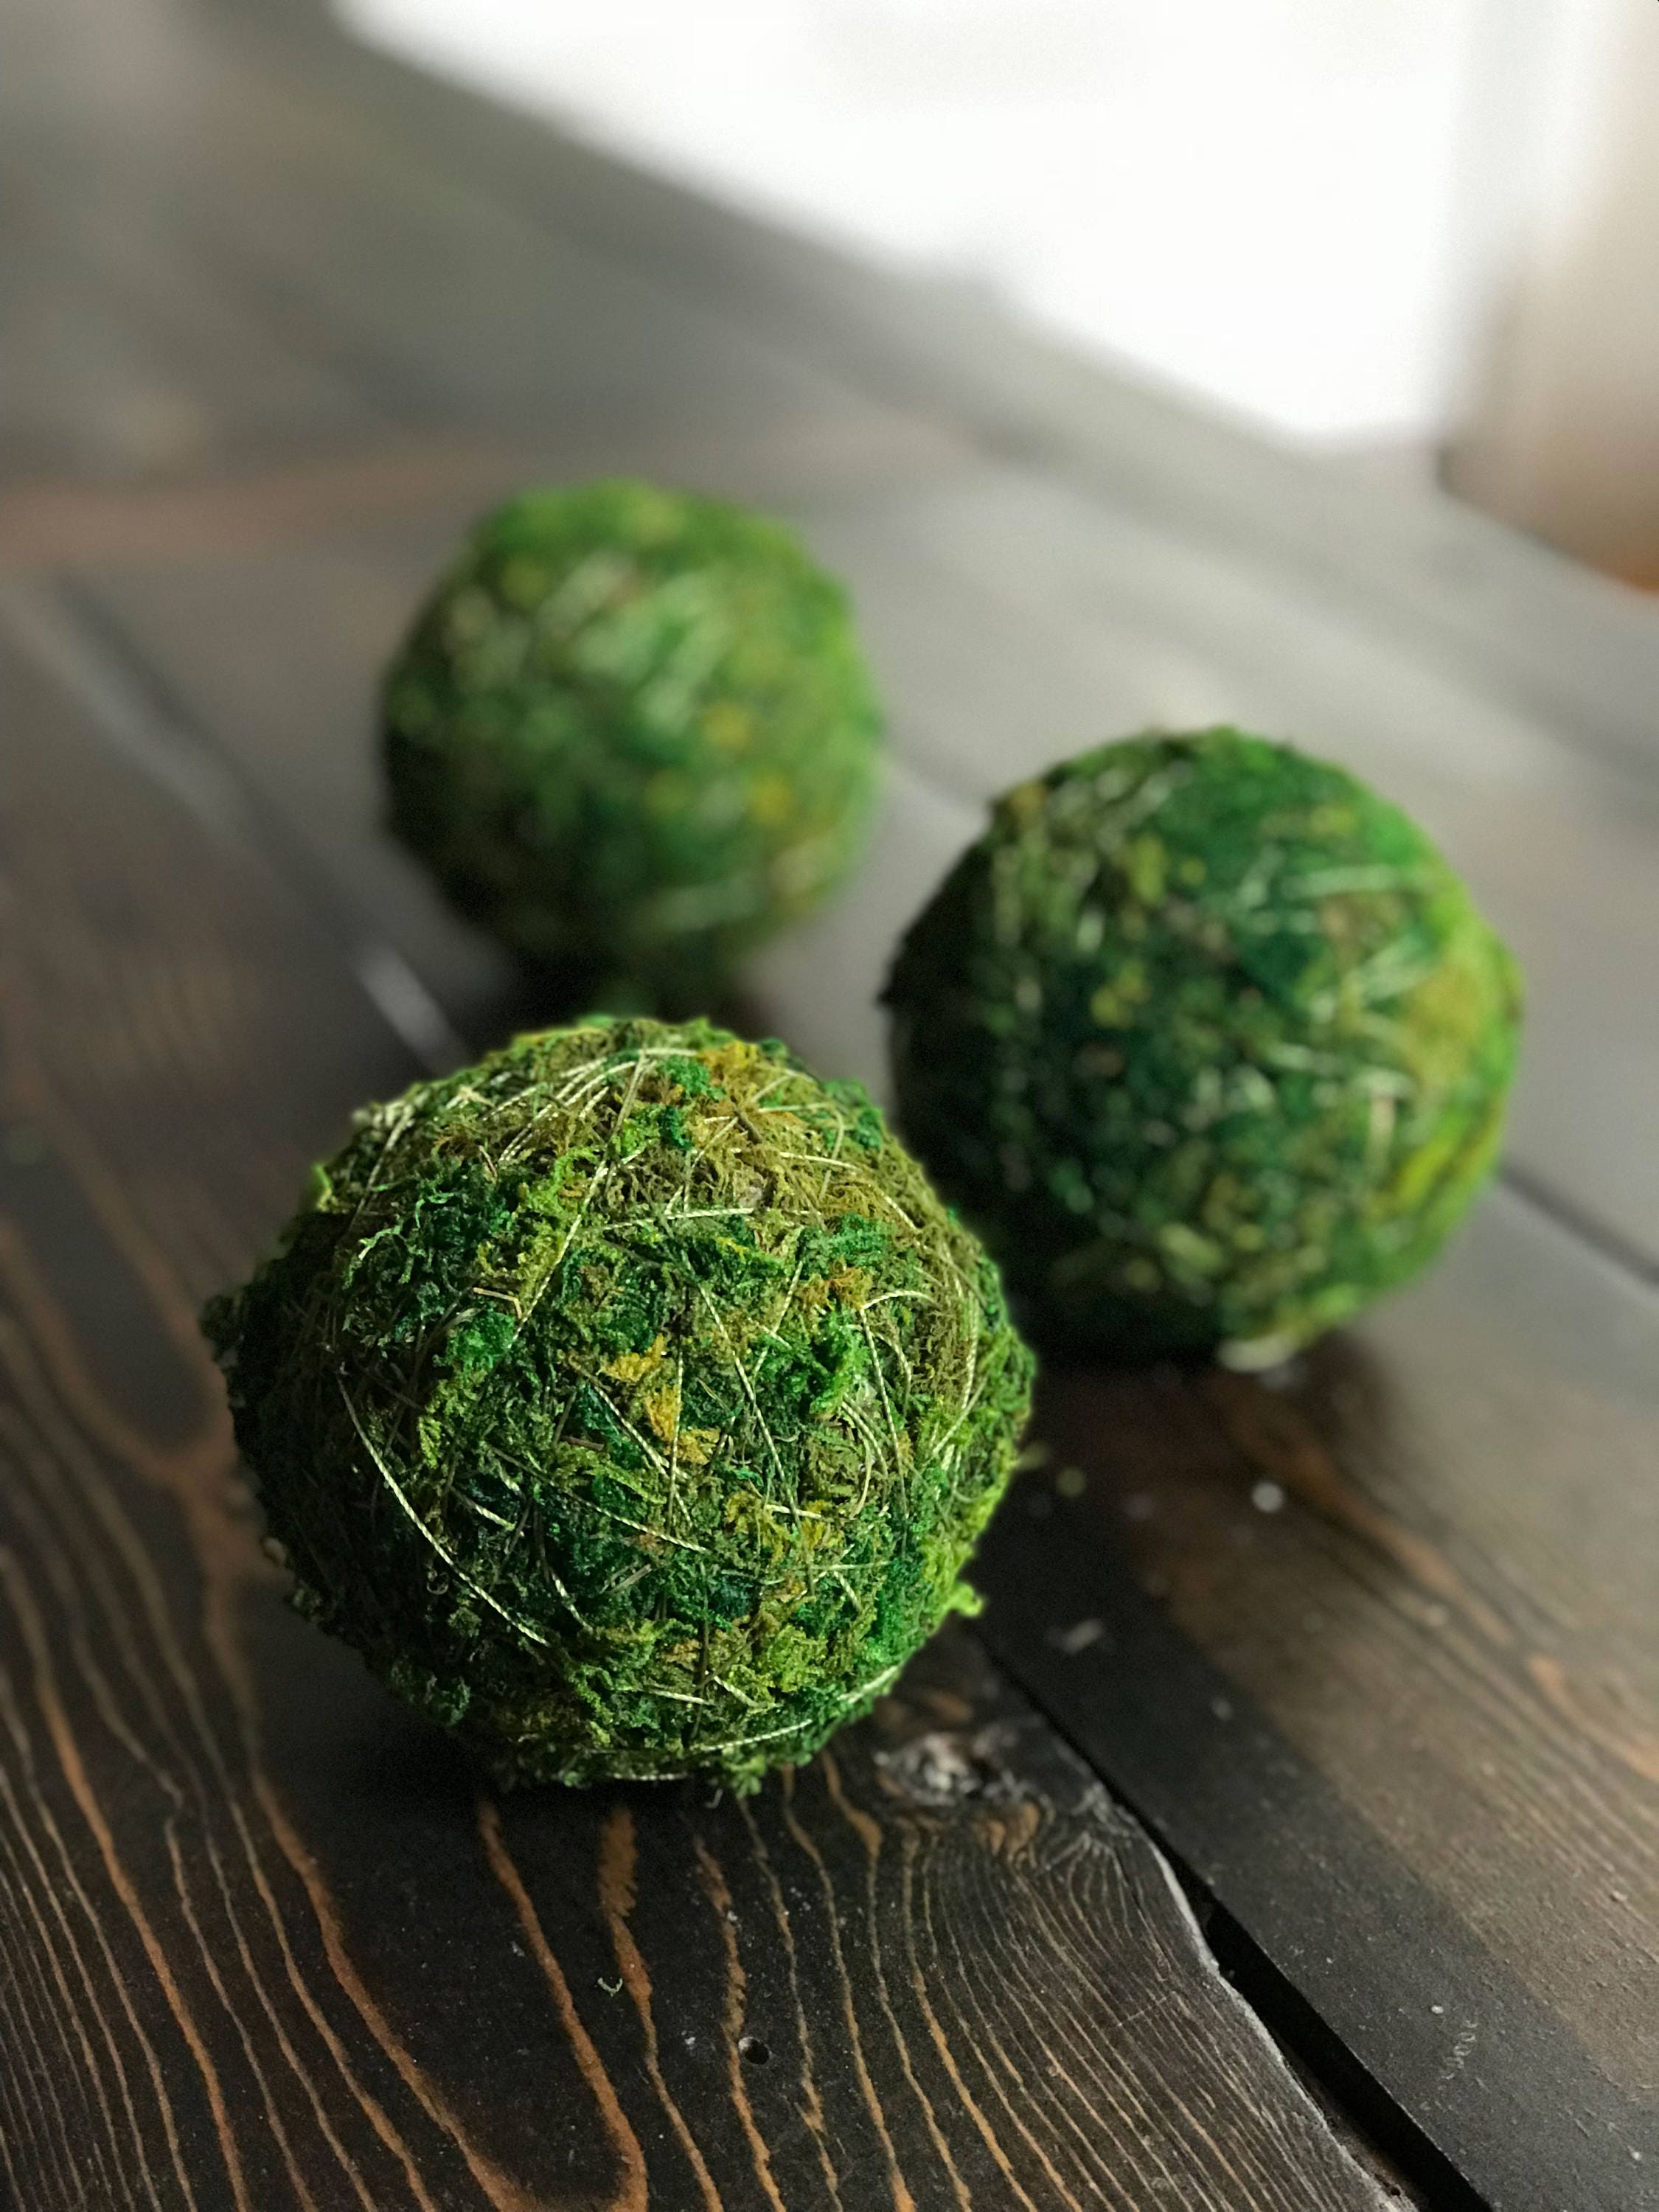 Lot of 5 Large Decorative Moss Balls for Centerpiece Bowls Natural Orbs  w/basket